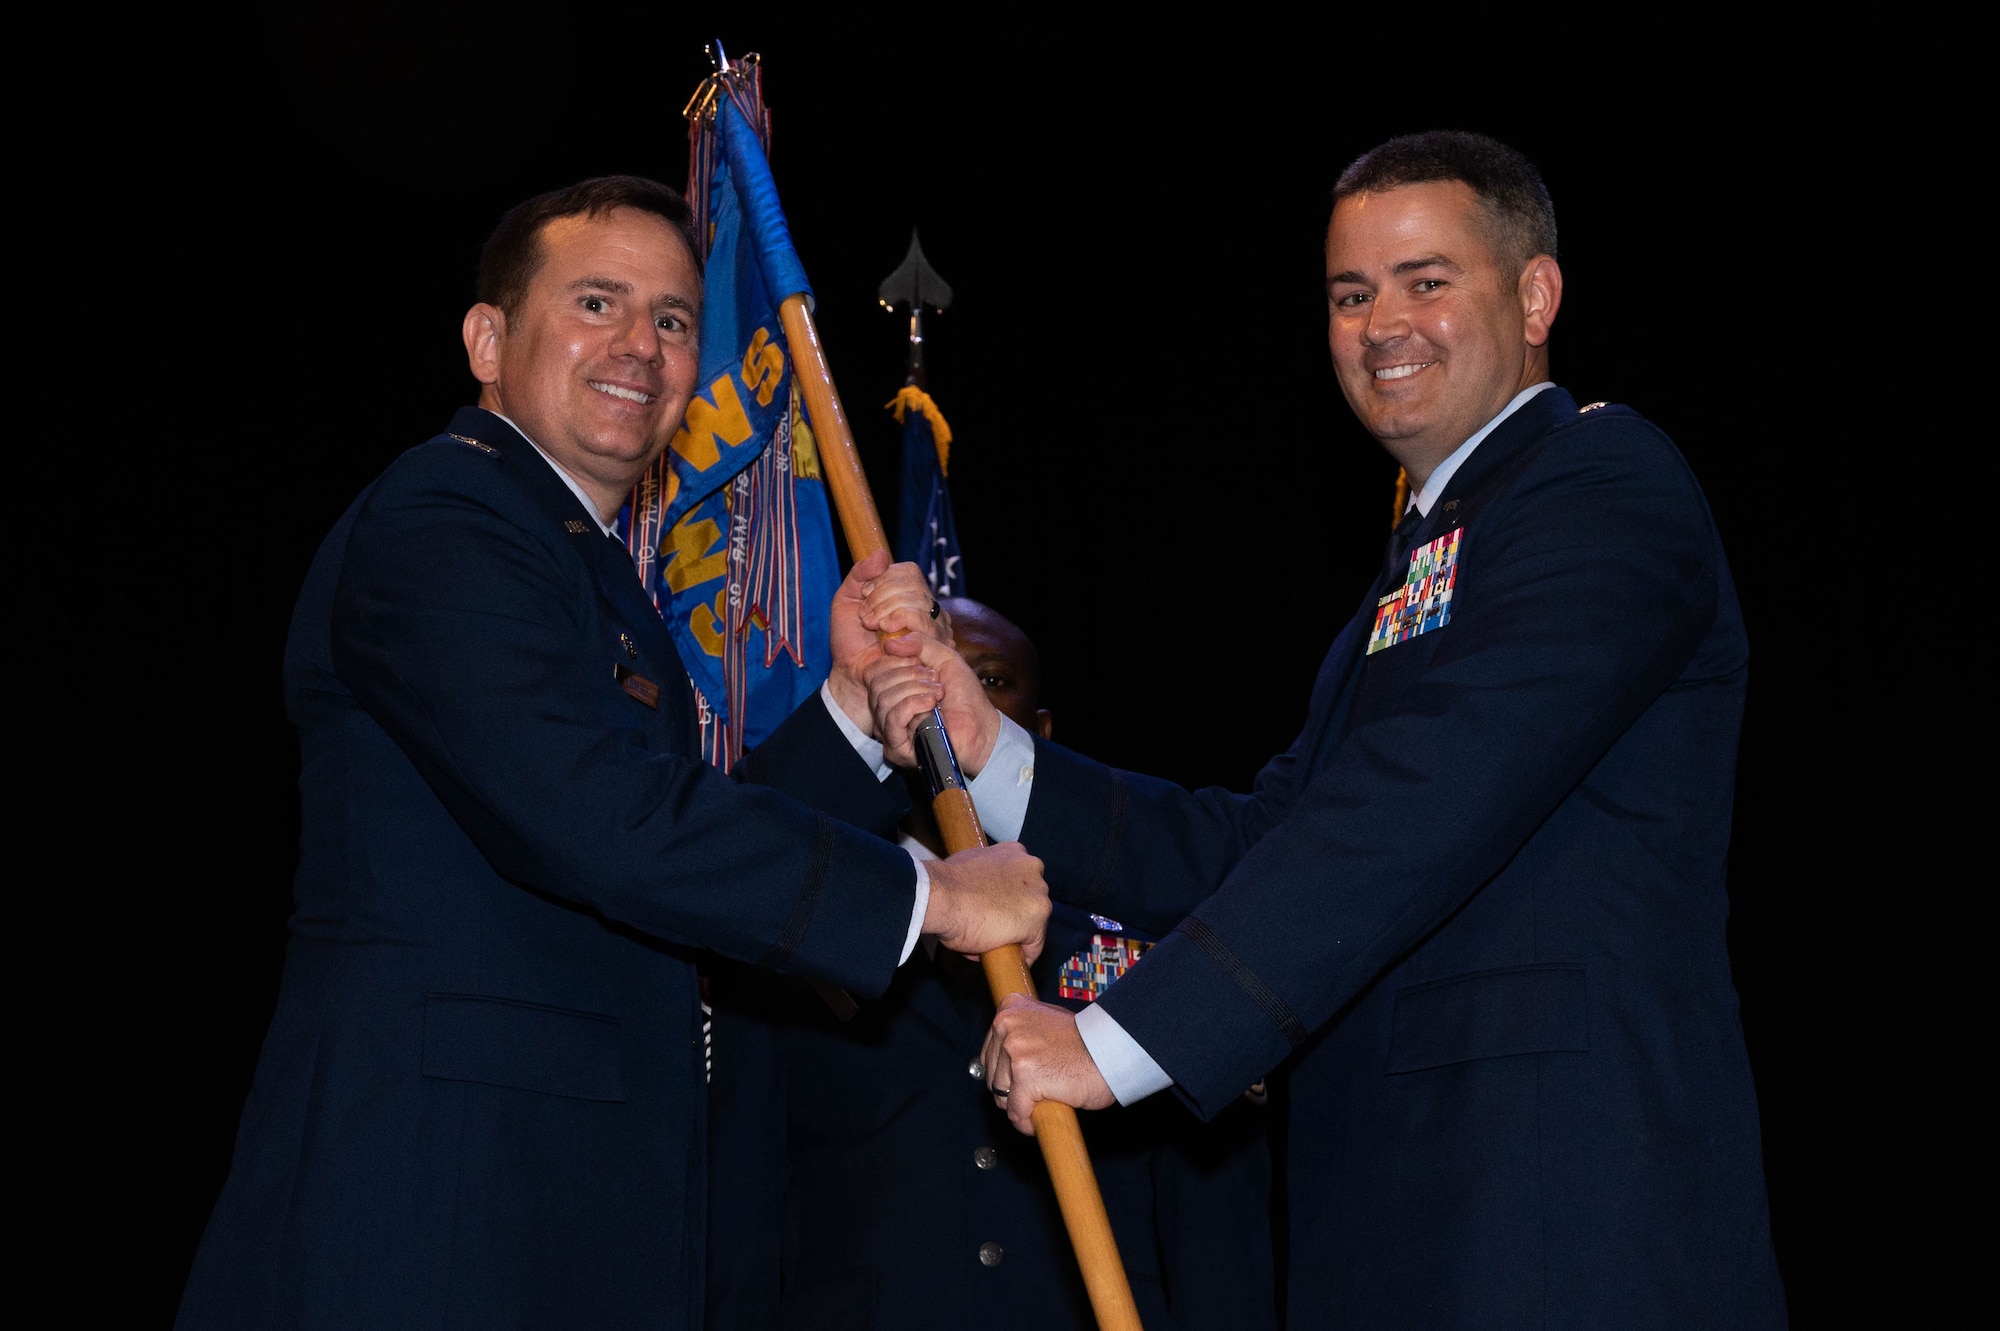 The passing of the guidon during a change of command ceremony.